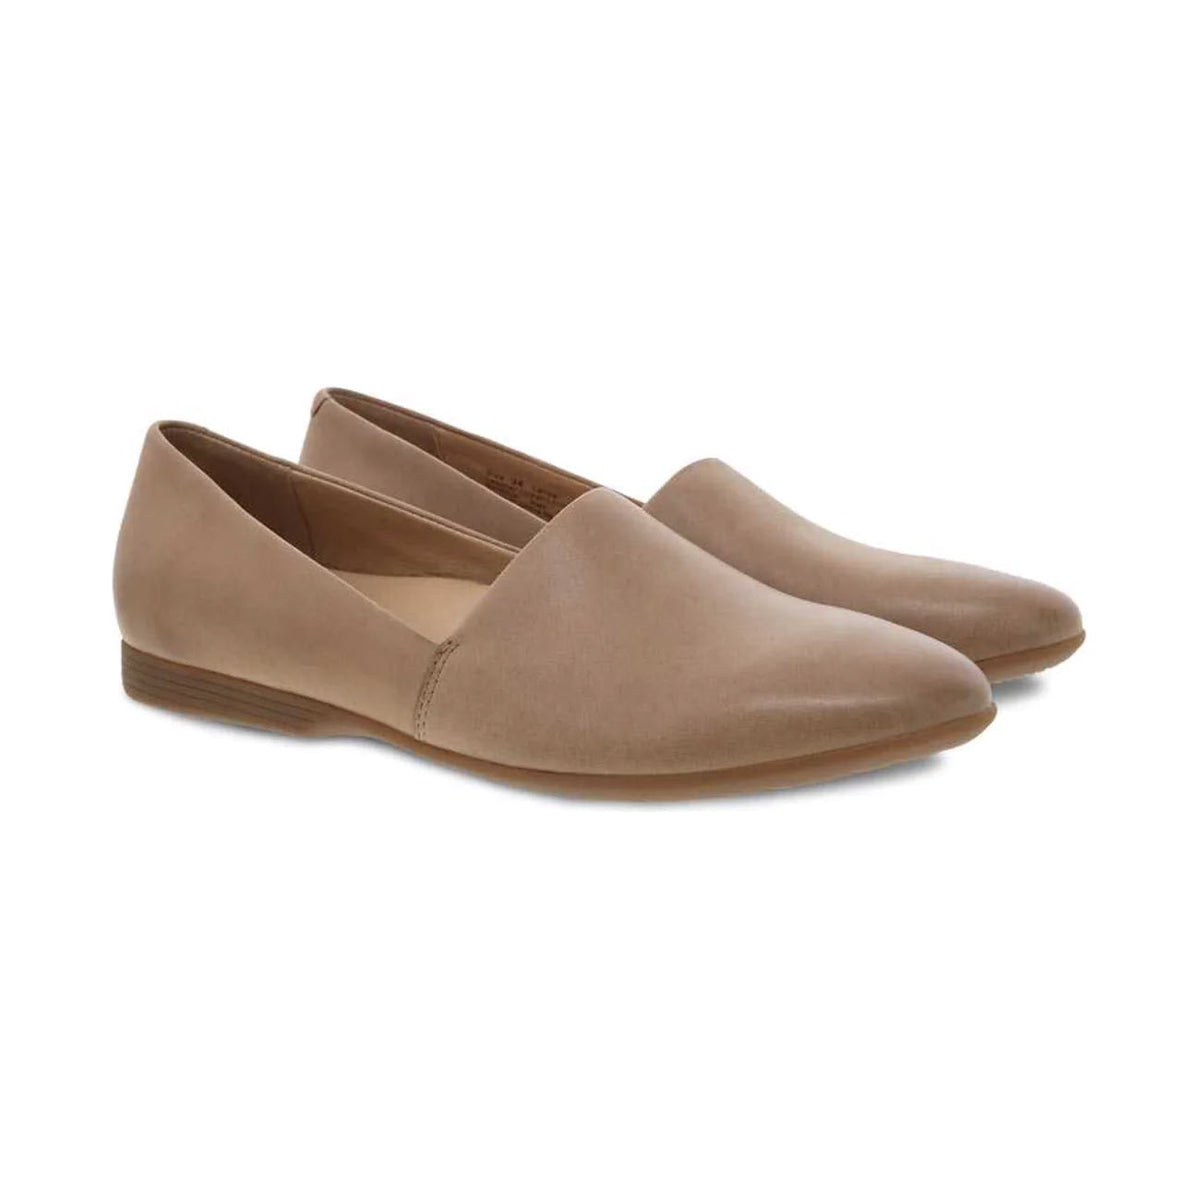 A pair of beige Dansko Larisa Taupe slip-on flats with memory foam cushioning on a white background.